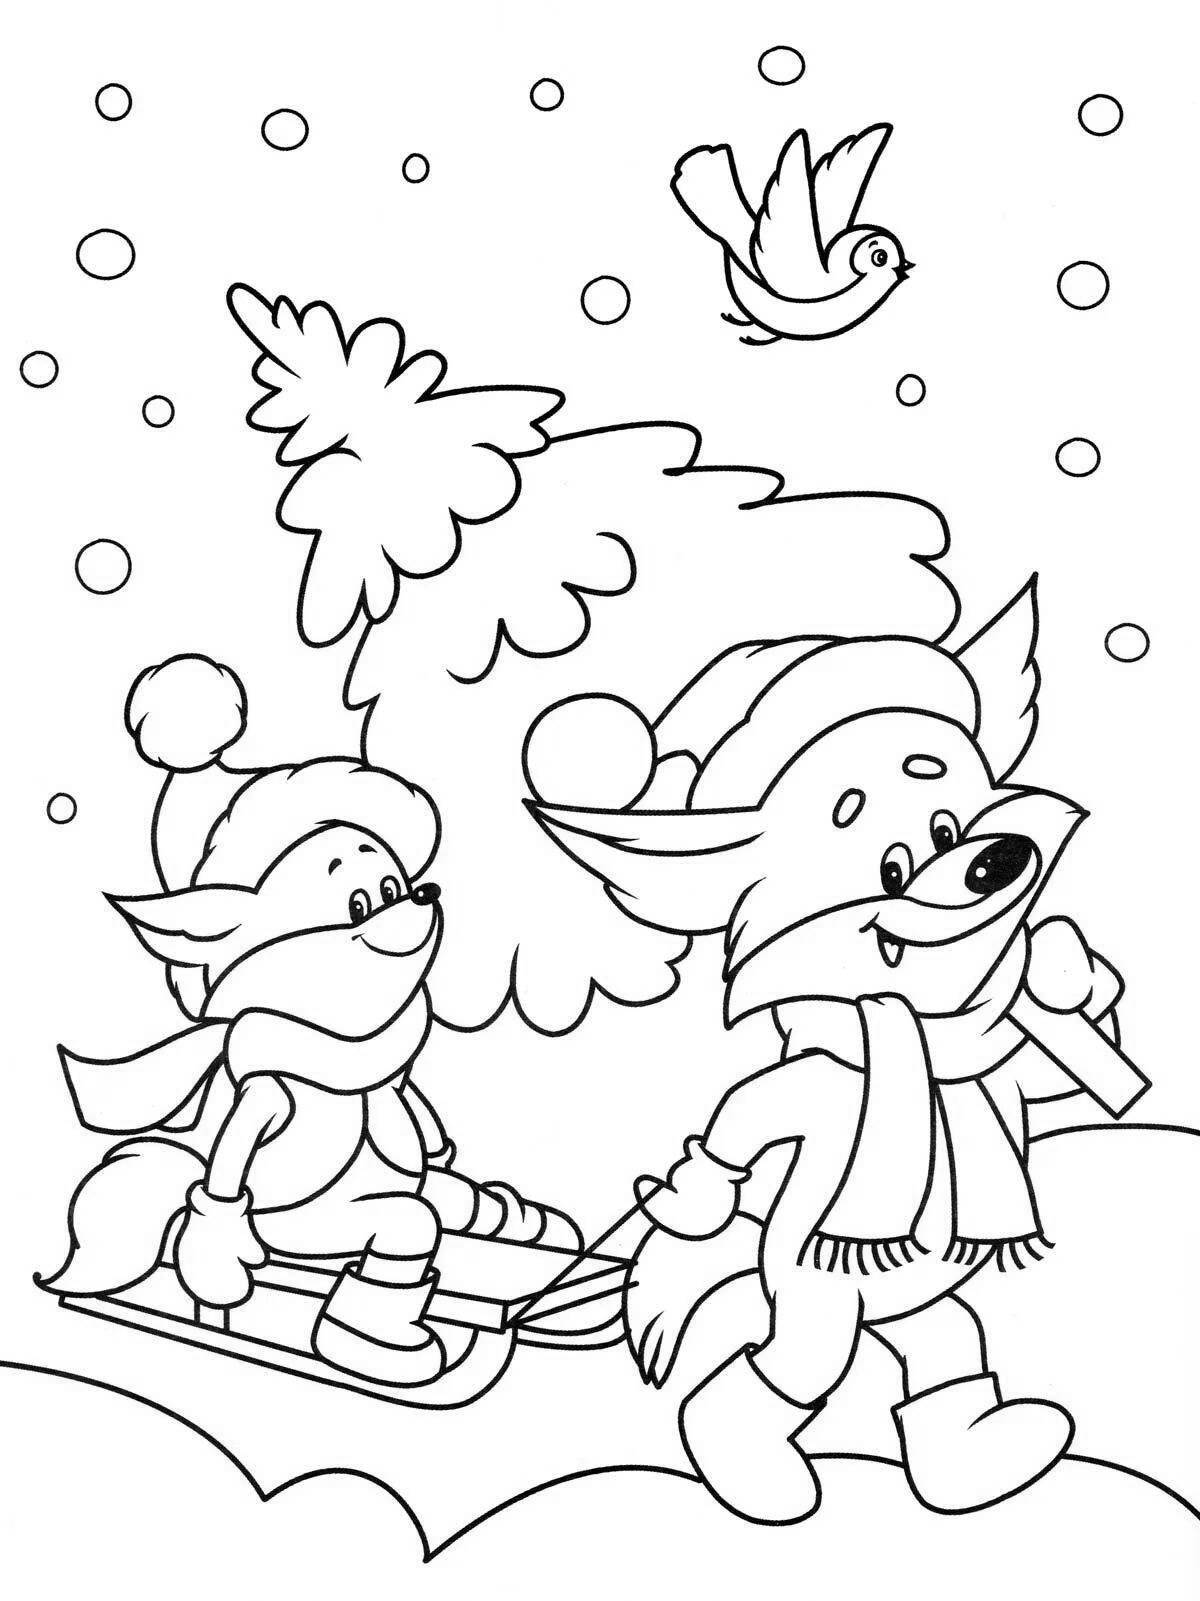 Shining winter coloring book for children 8 years old